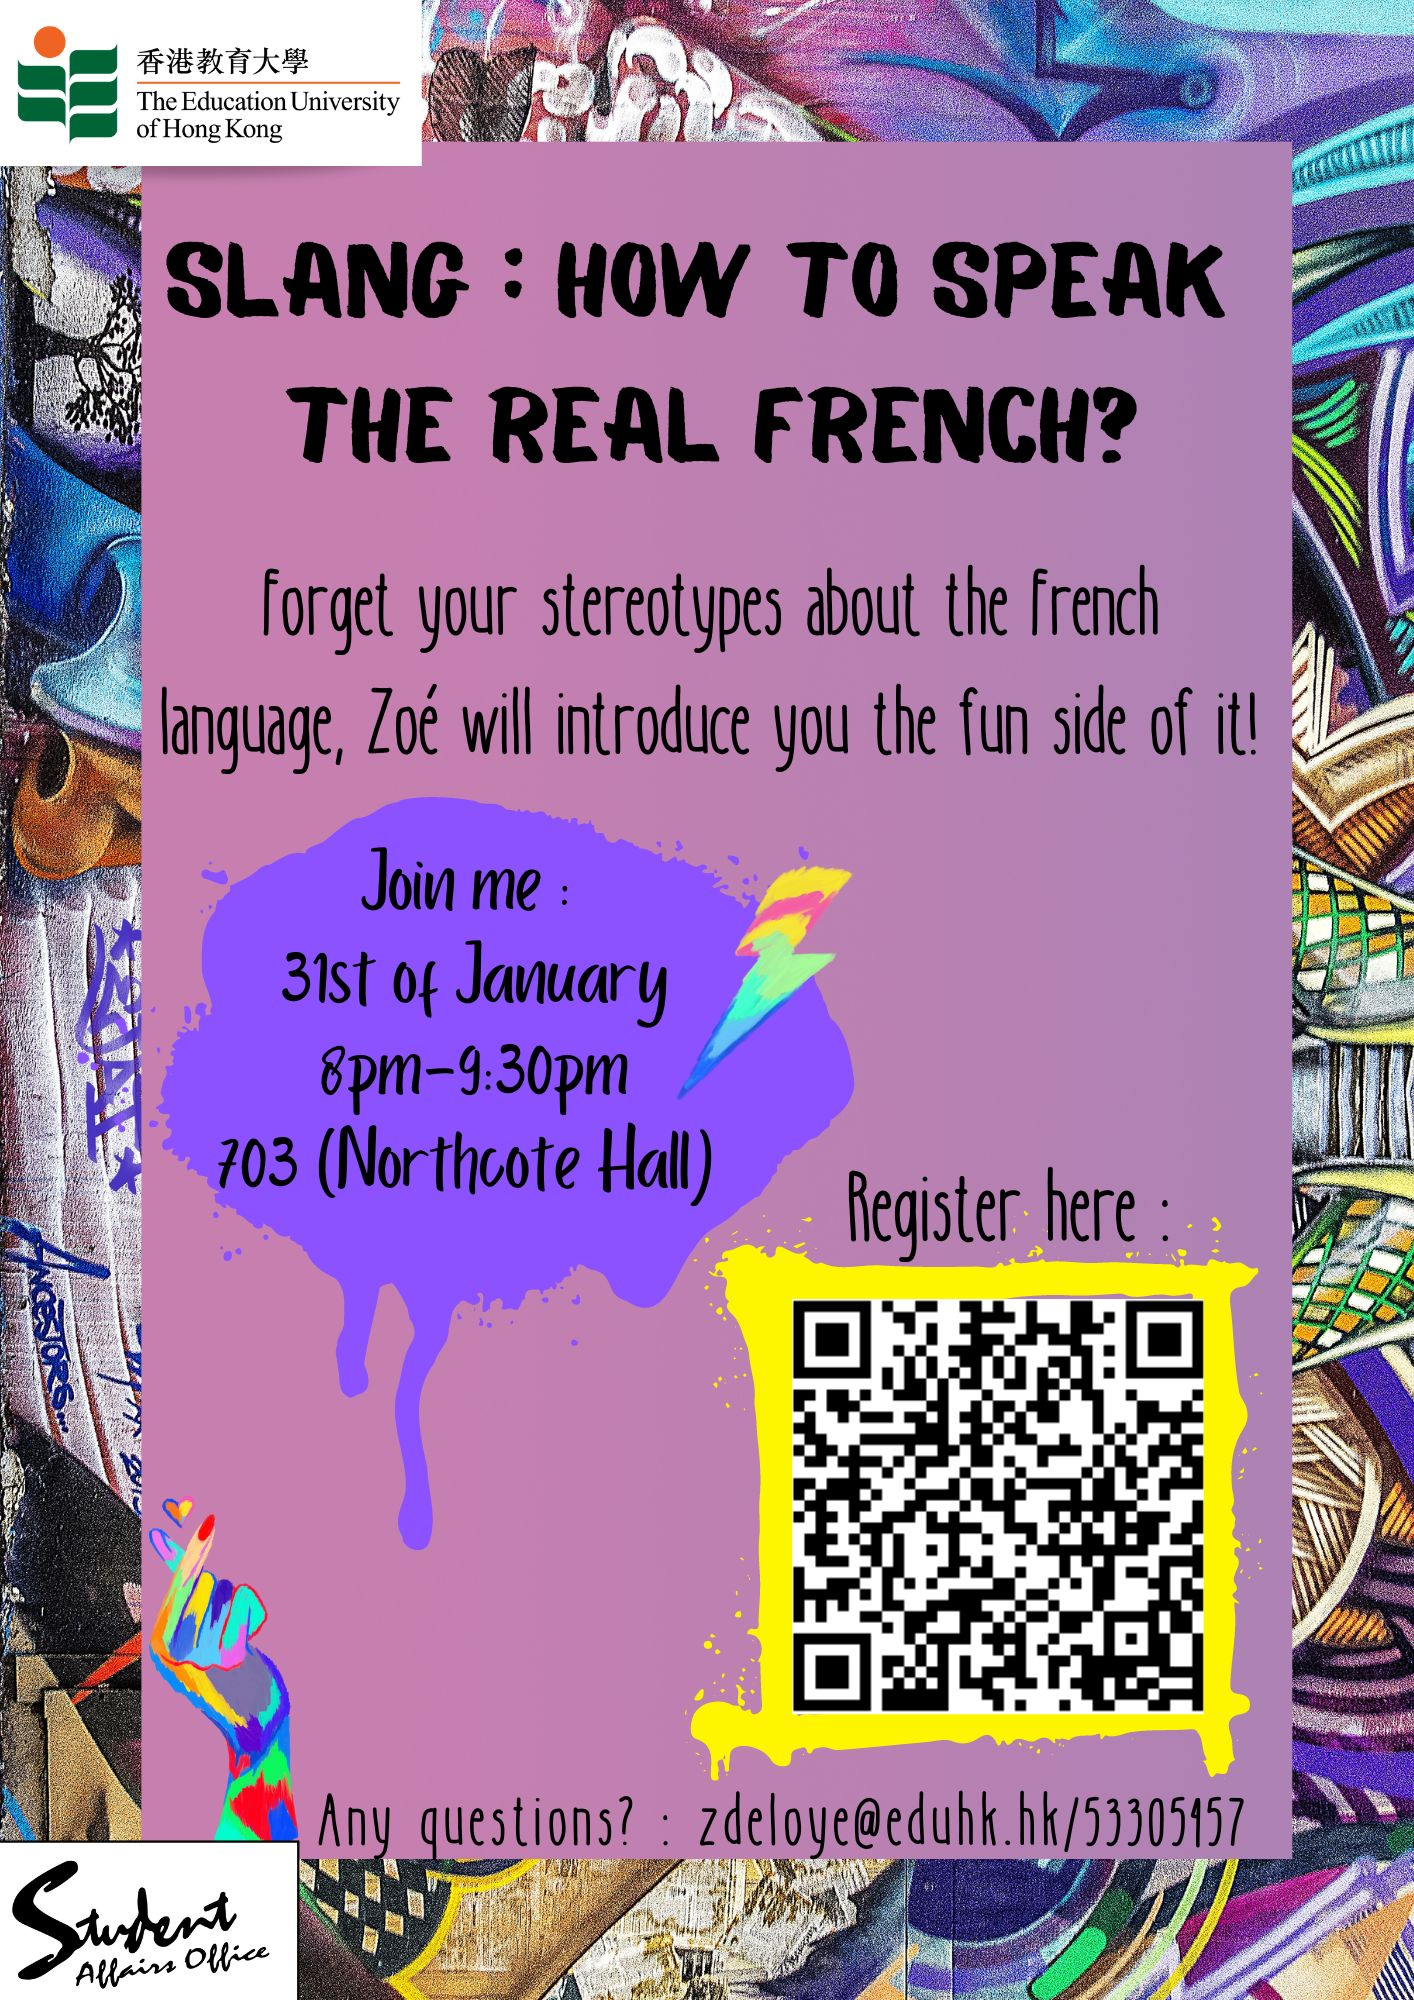 Self Photos / Files - Zoe_Slang  how to speak the real French_poster